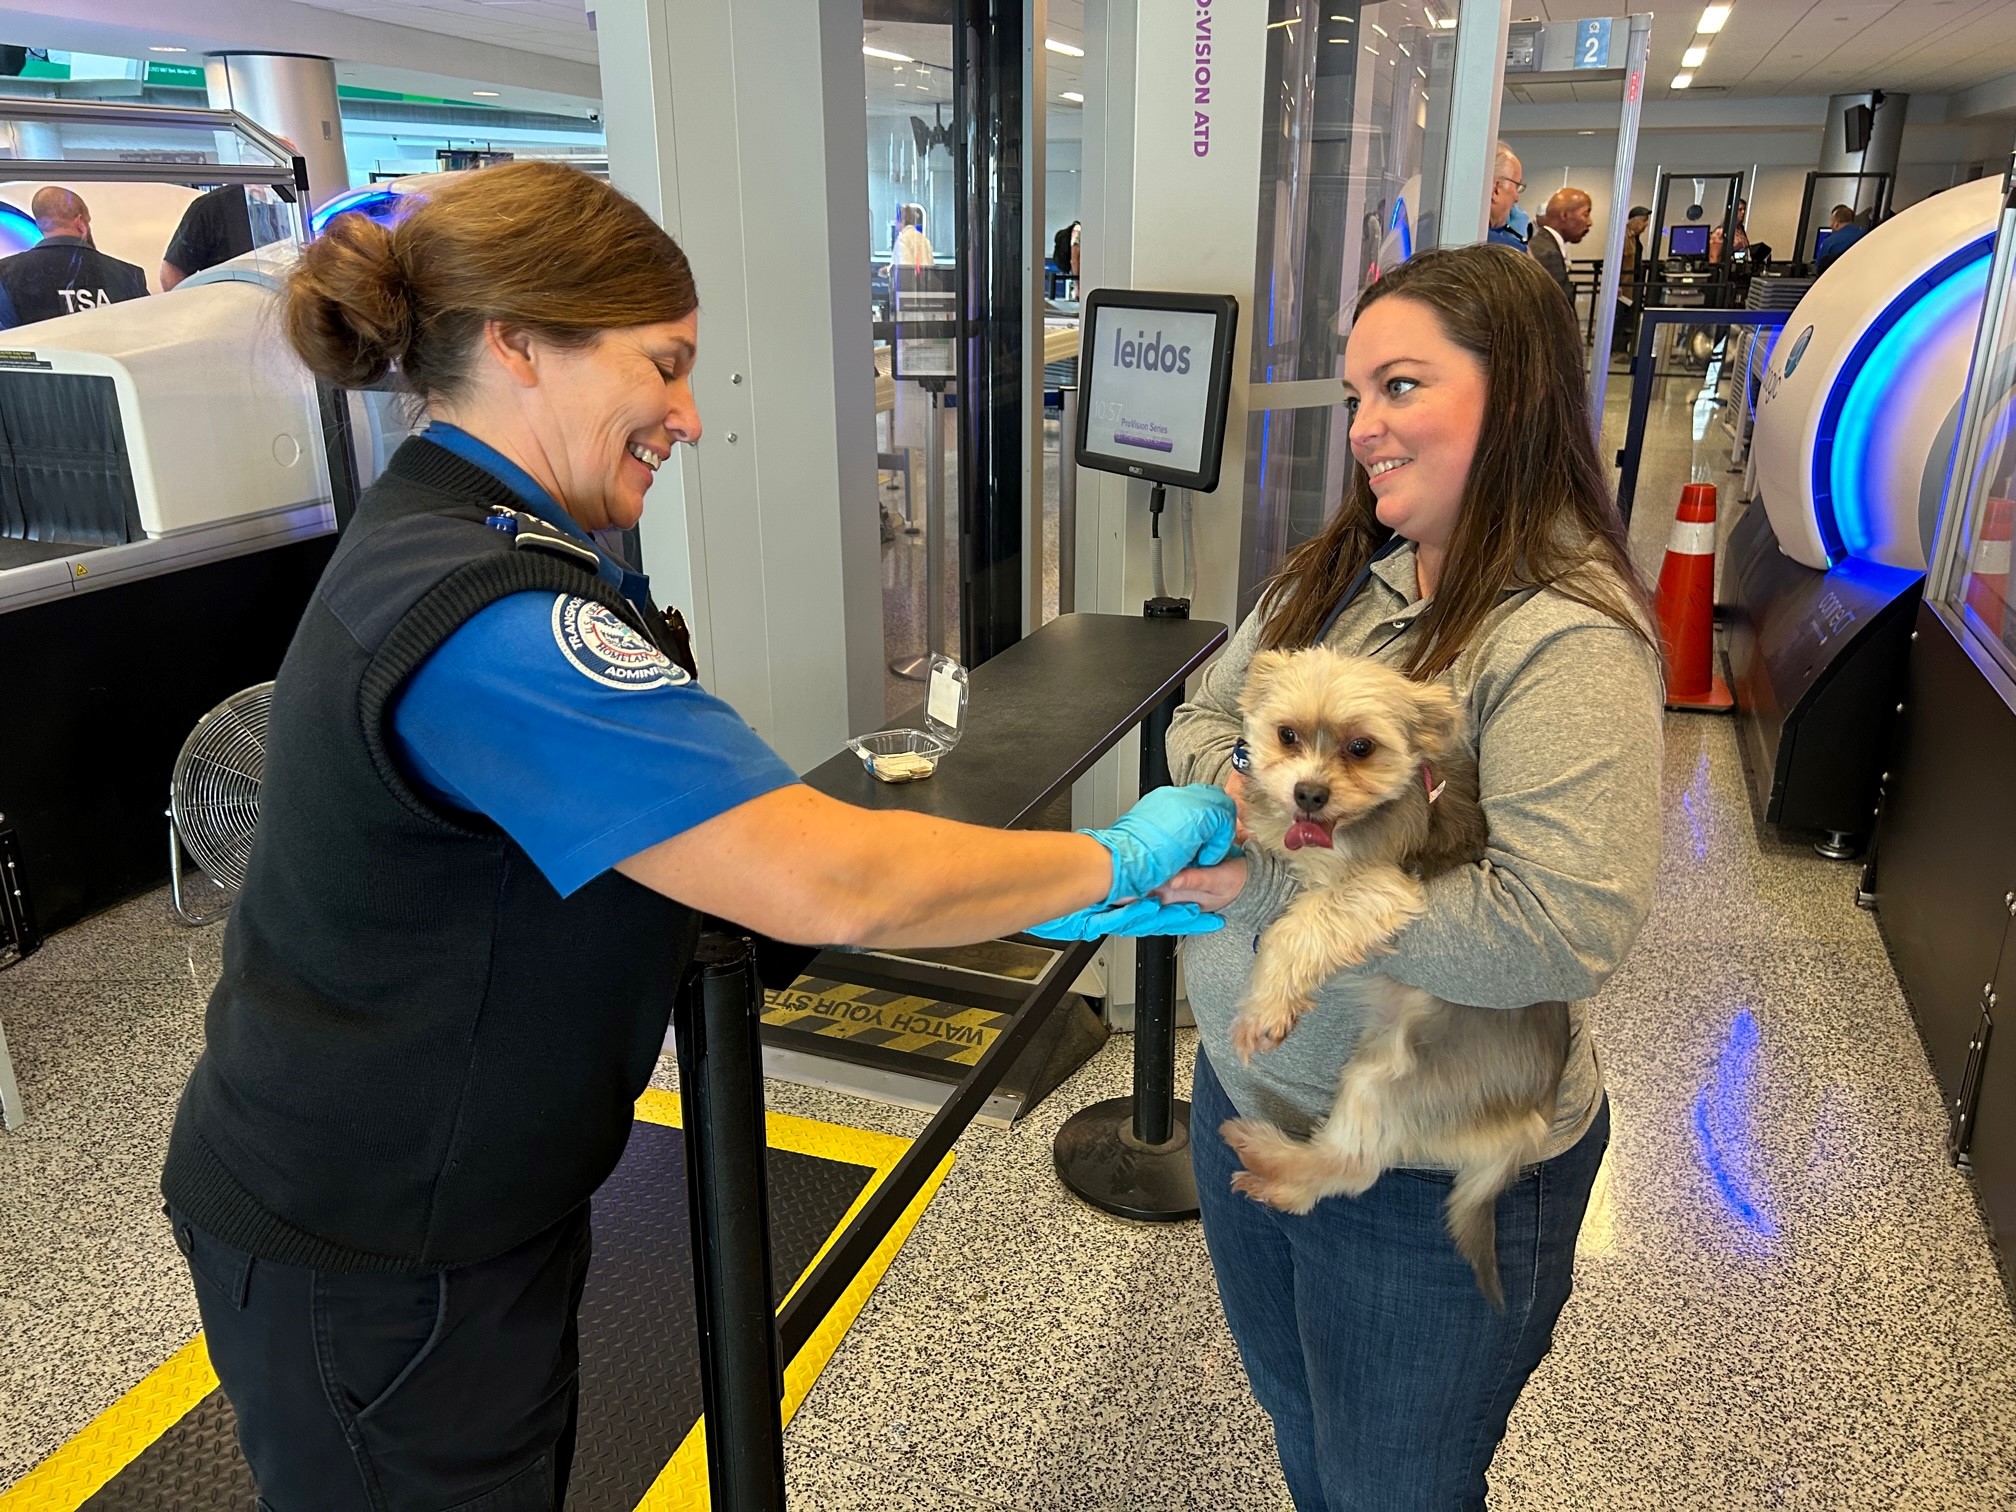 After walking her dog through the checkpoint scanner, a TSA officer swabs the hands of the passenger to check for any traces of explosives. (TSA photo)